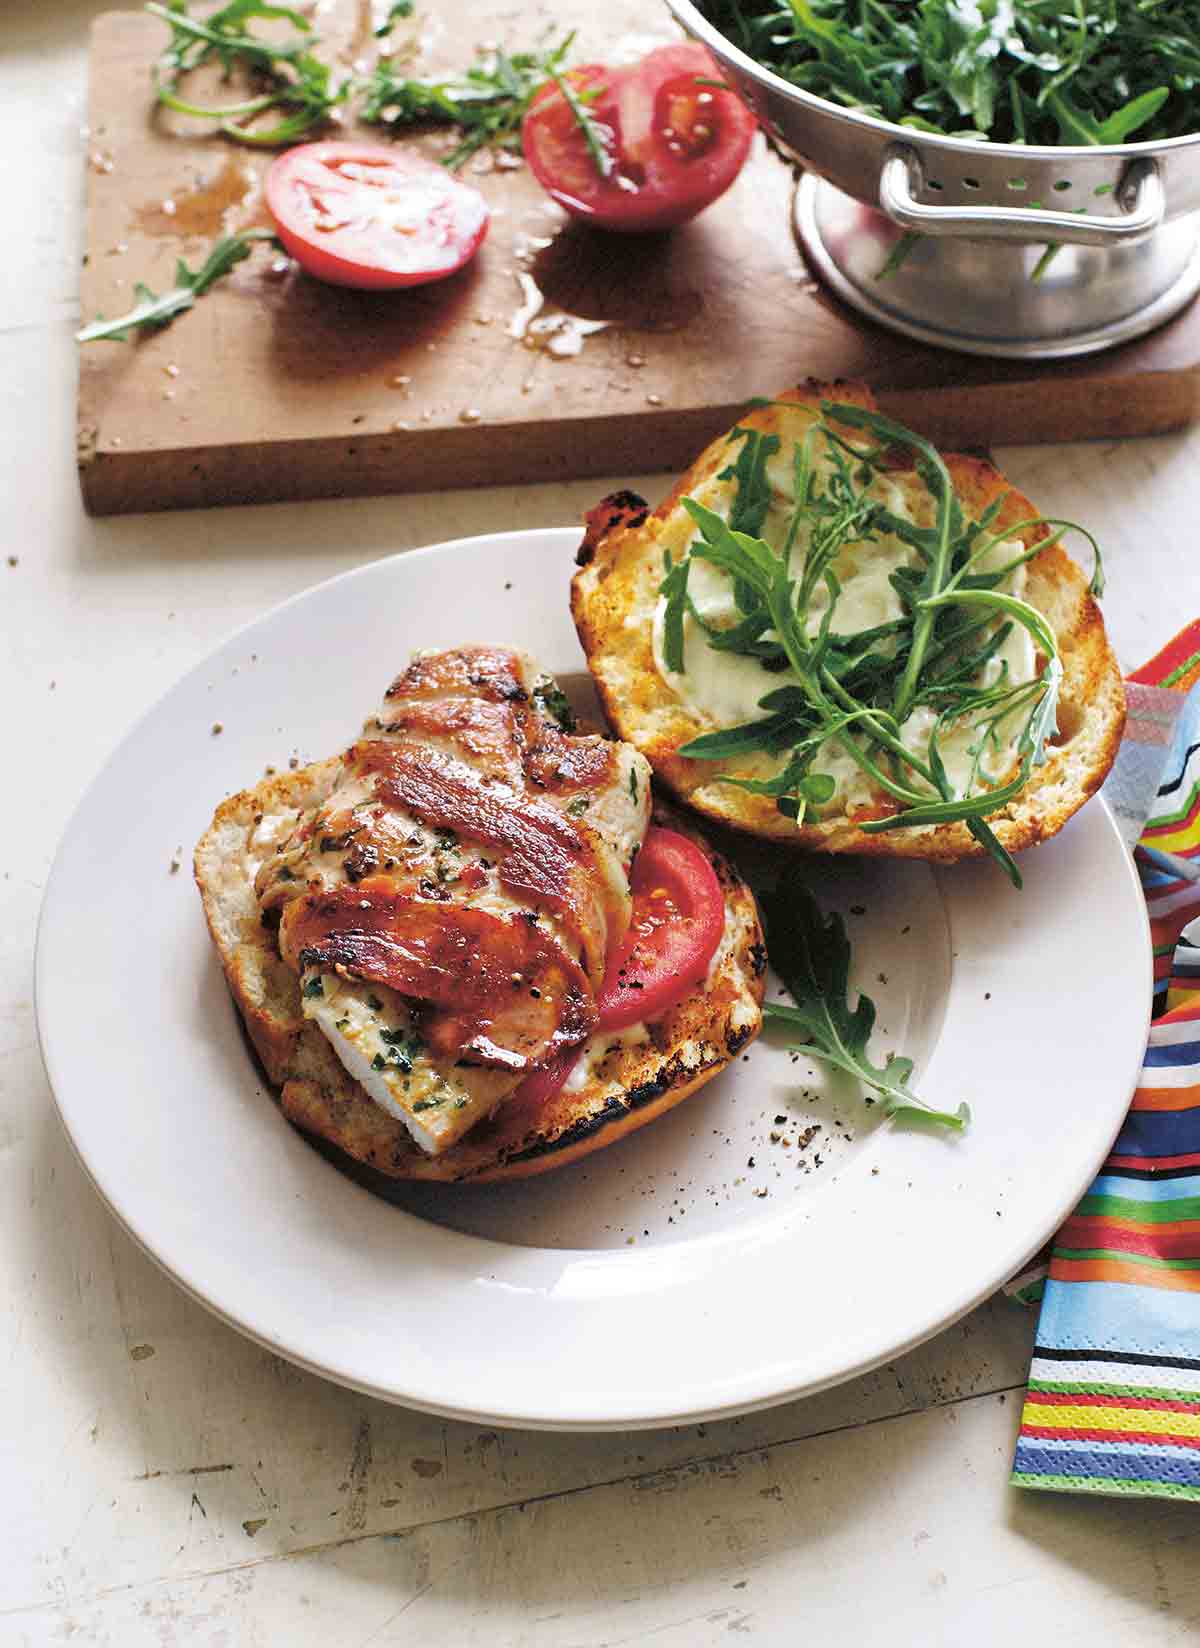 A spicy bacon-wrapped grilled chicken breast on top of a bun and tomato slices with the top half of the bun and some arugula next to it.